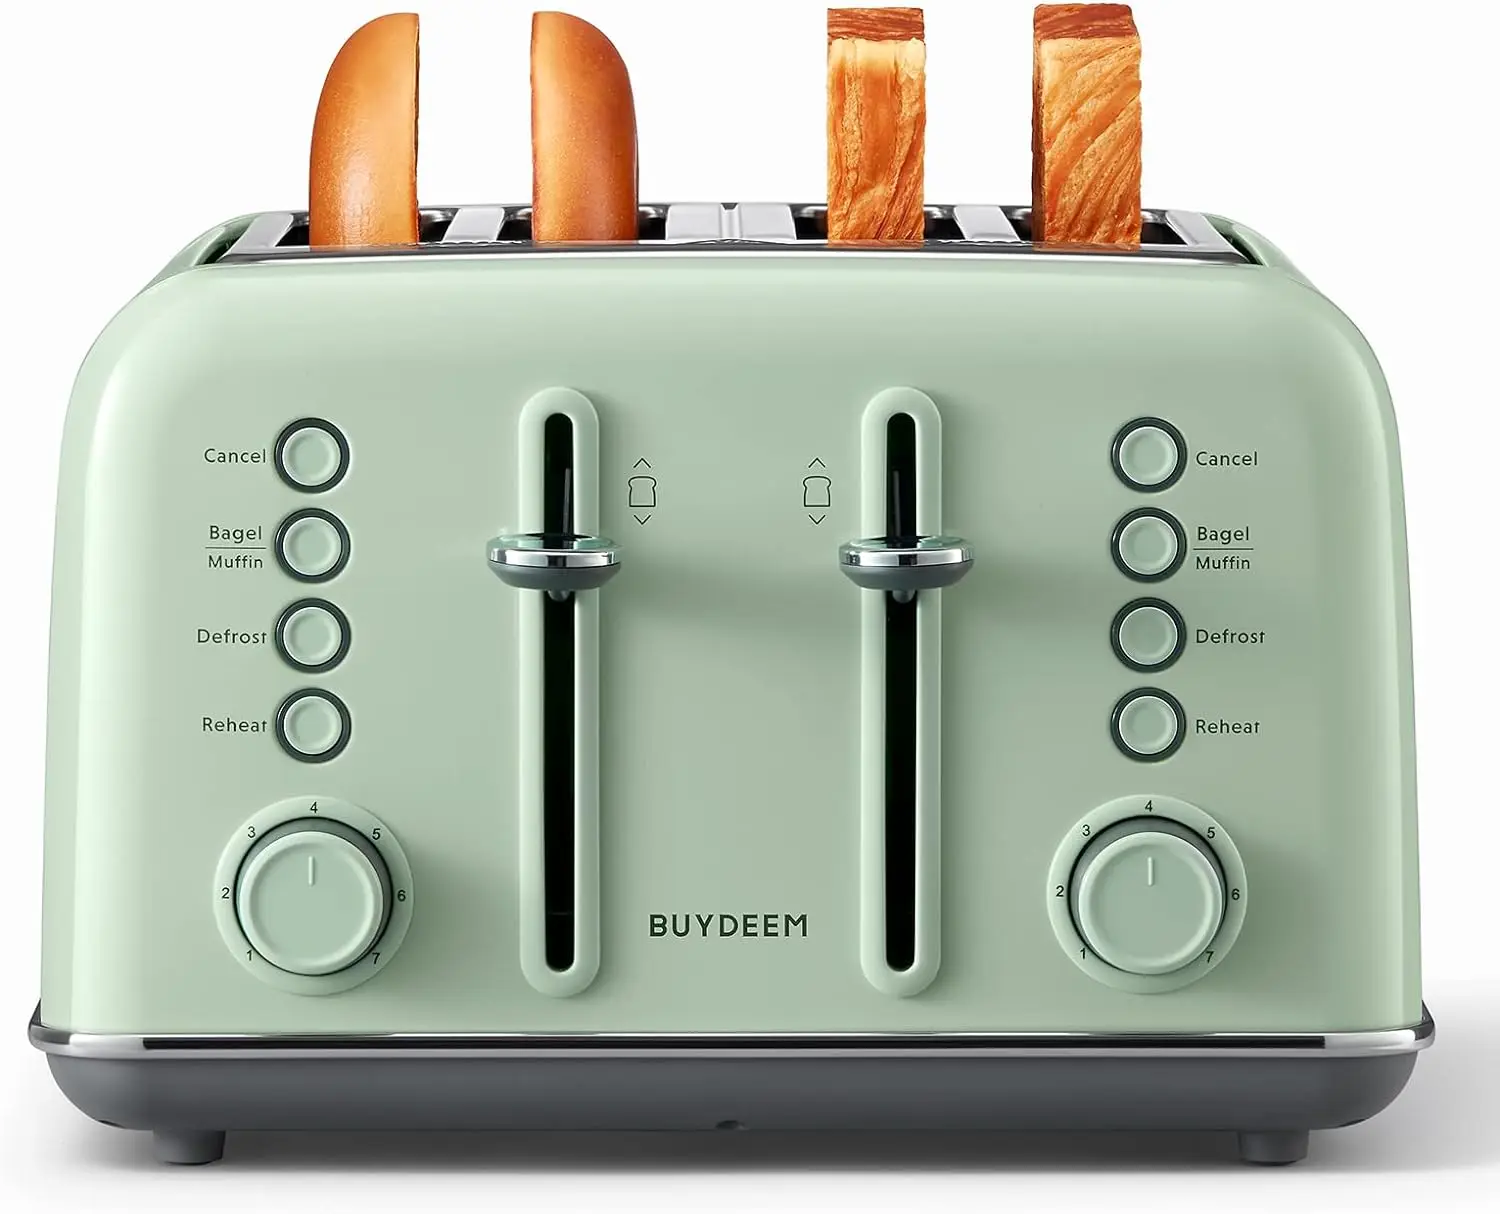 

BUYDEEM DT640 4-Slice Toaster, Extra Wide Slots, Retro Stainless Steel with High Lift Lever, Bagel and Muffin Function